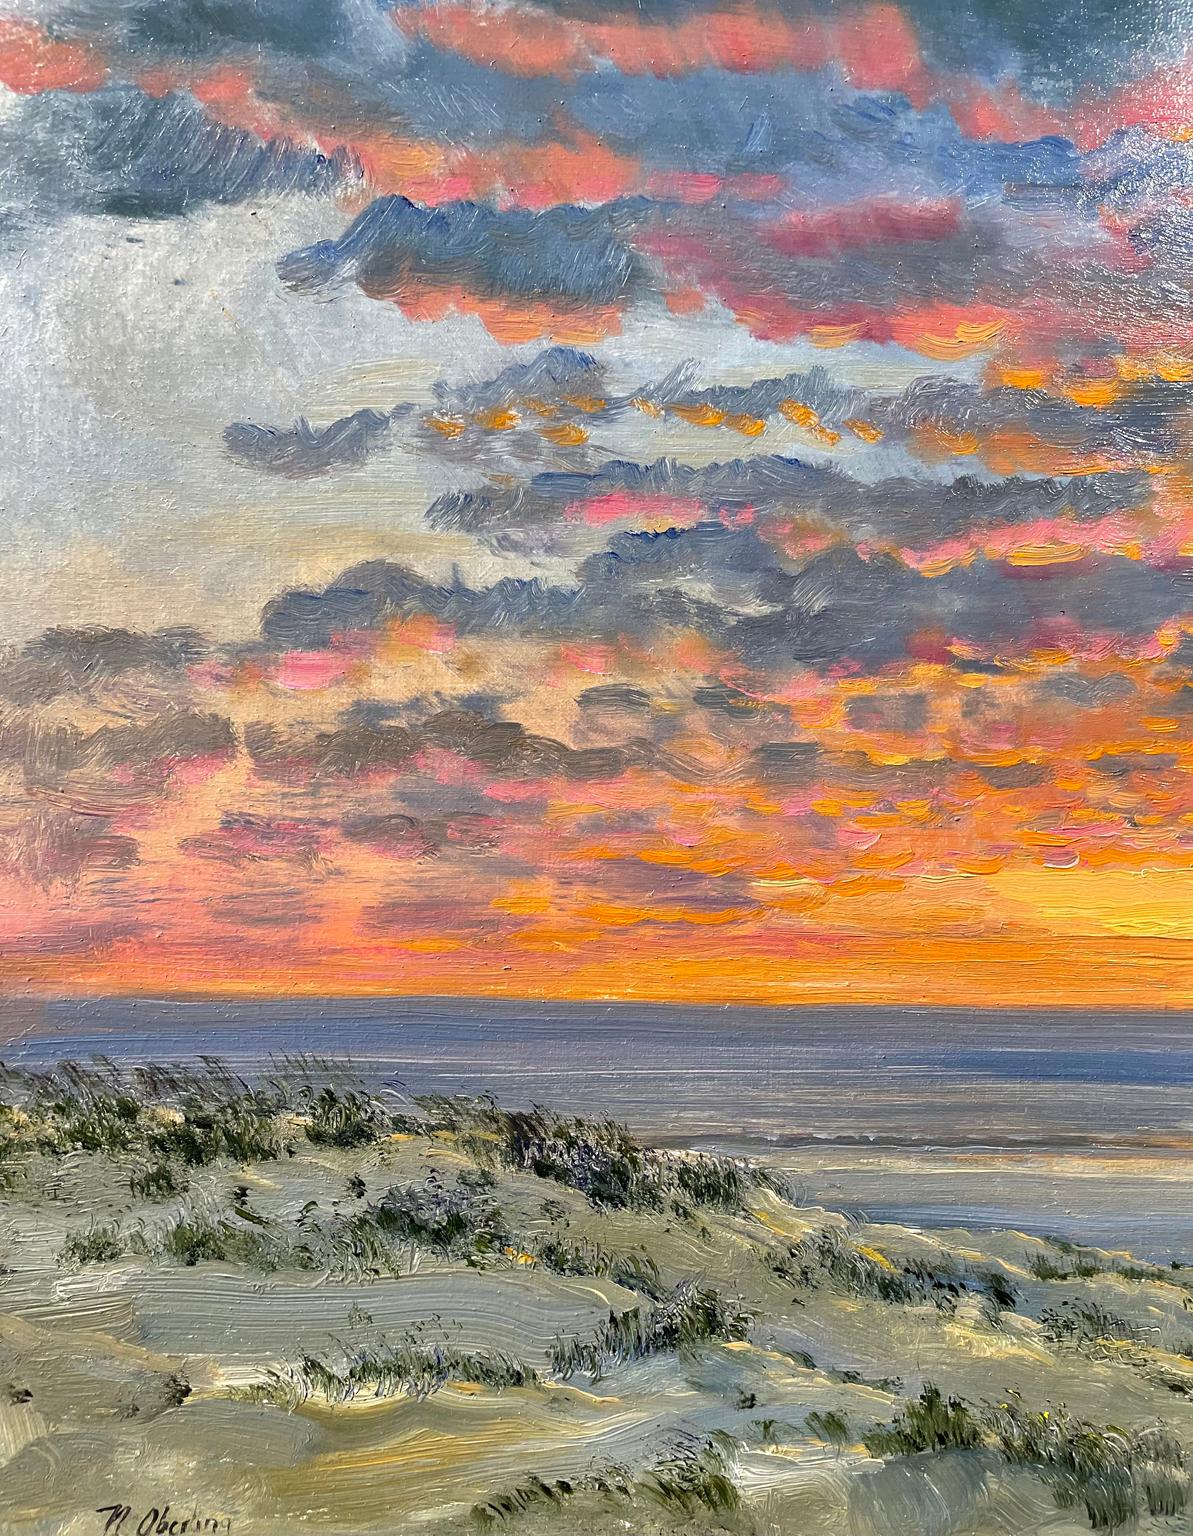 Mackerel Sky off the Gulf Coast of Florida - Painting by Nicholas Oberling